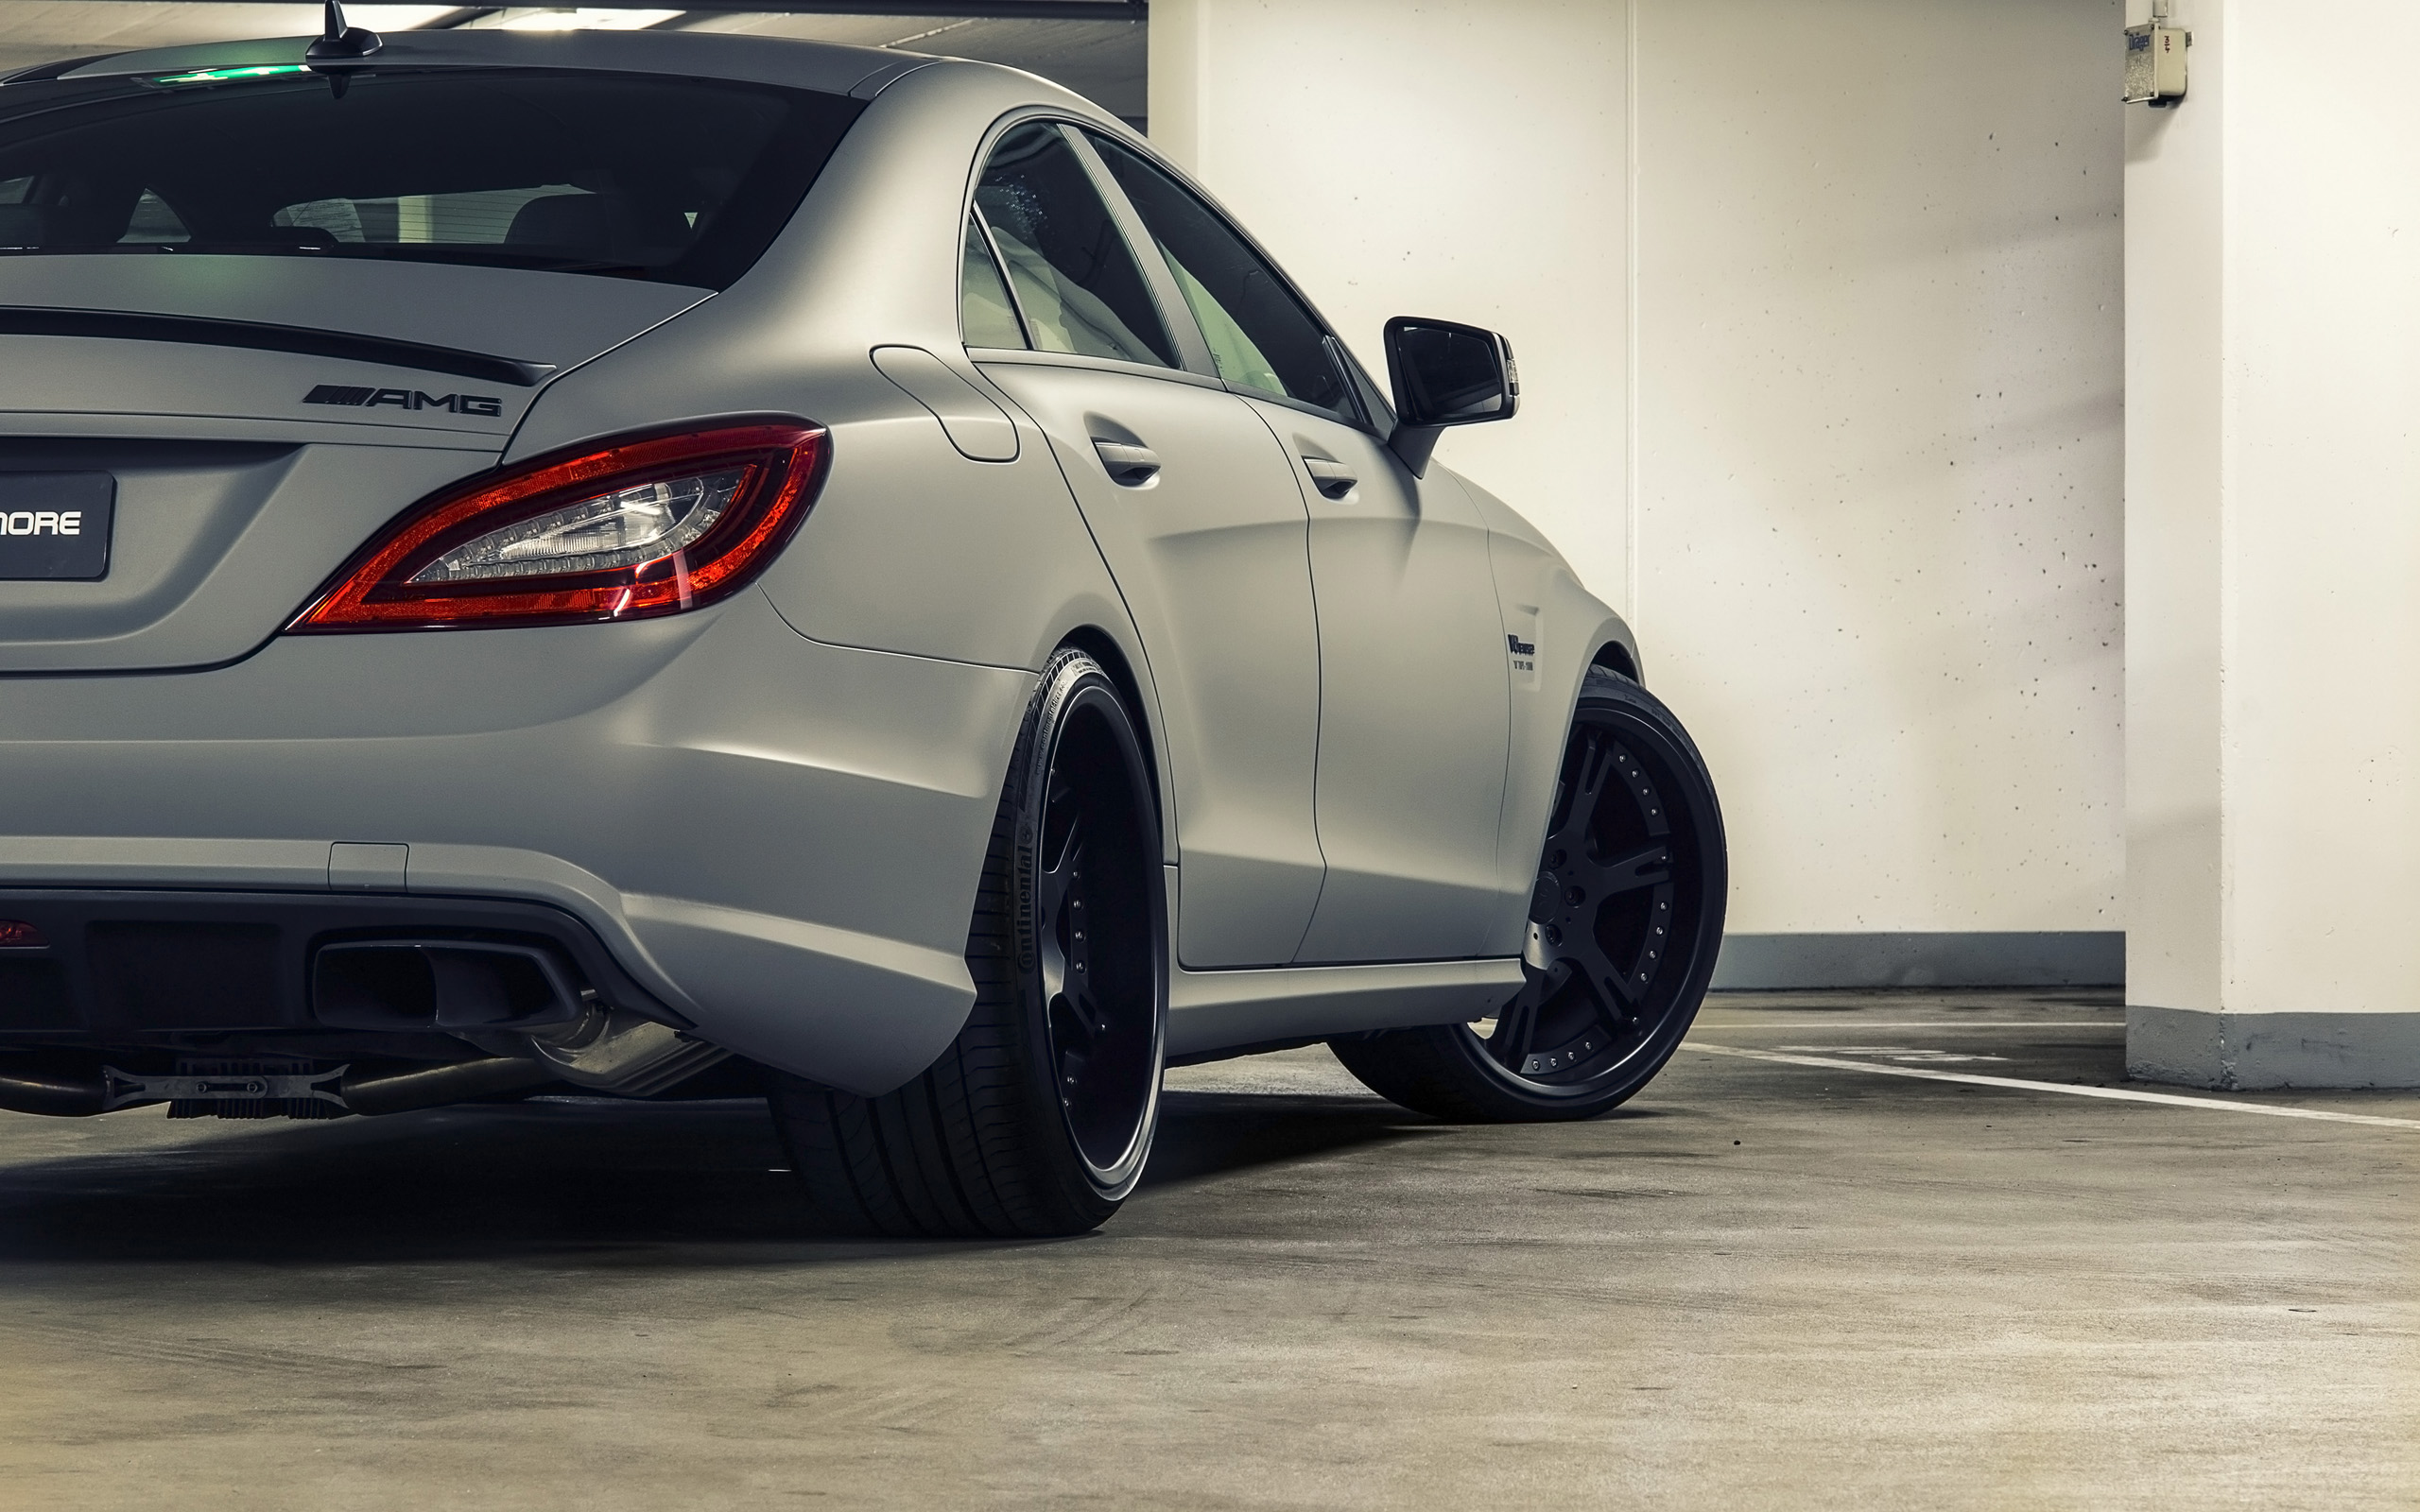 2012 Wheelsandmore Mercedes Benz Cls63 Amg Seven 11 Tuning Wheel Wallpapers Hd Desktop And Mobile Backgrounds